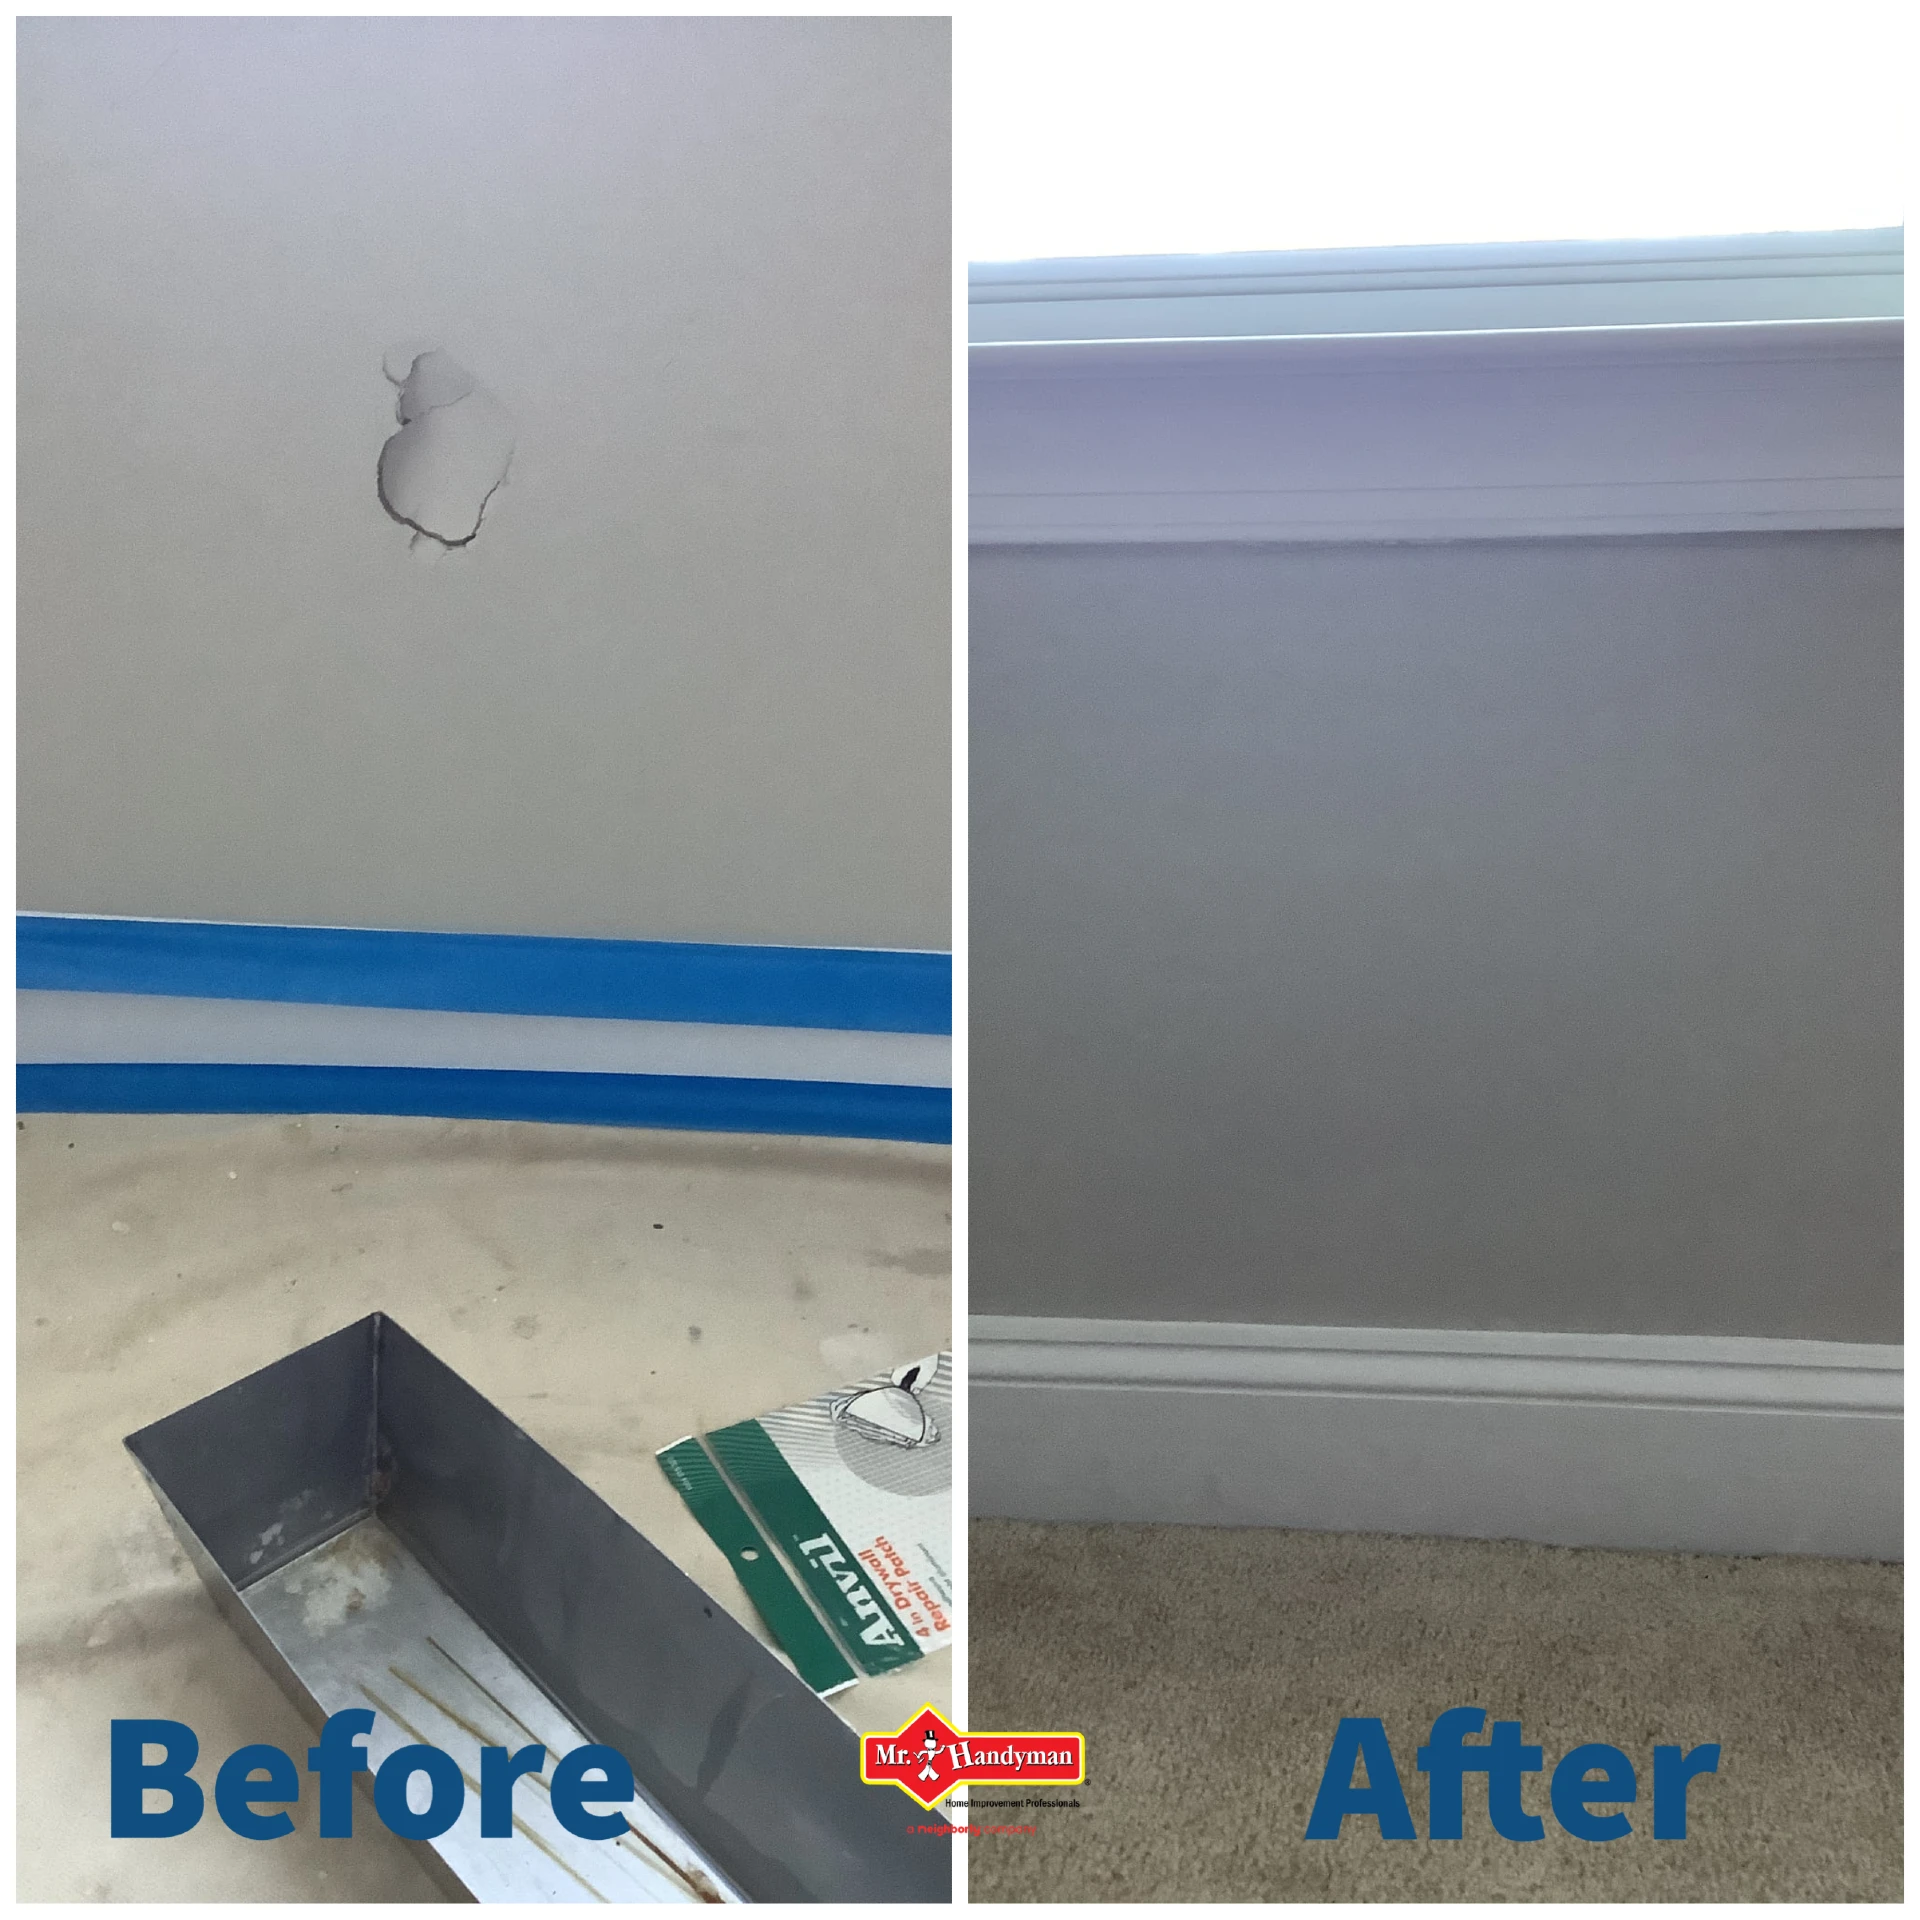  A hole in a wall before and after it has been fixed and repainted by Mr. Handyman.